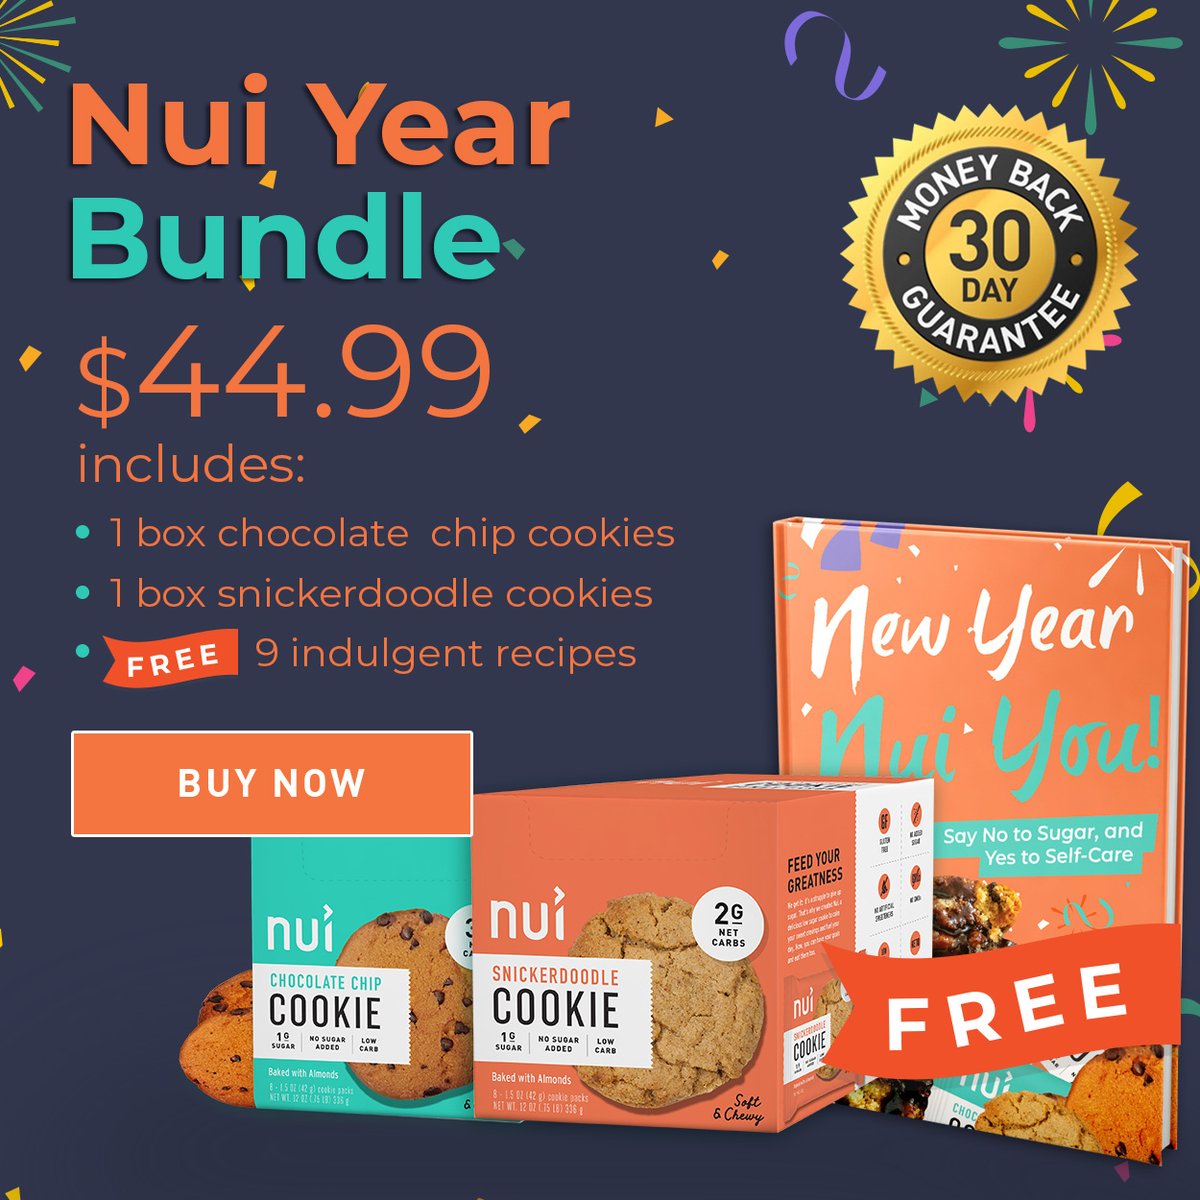 Get your Nui Year Keto Cookie Bundle! Comes with 1 box of chocolate chip cookies, 1 box of snickerdoodle cookies and a Free recipes book! bit.ly/2QOzfRm